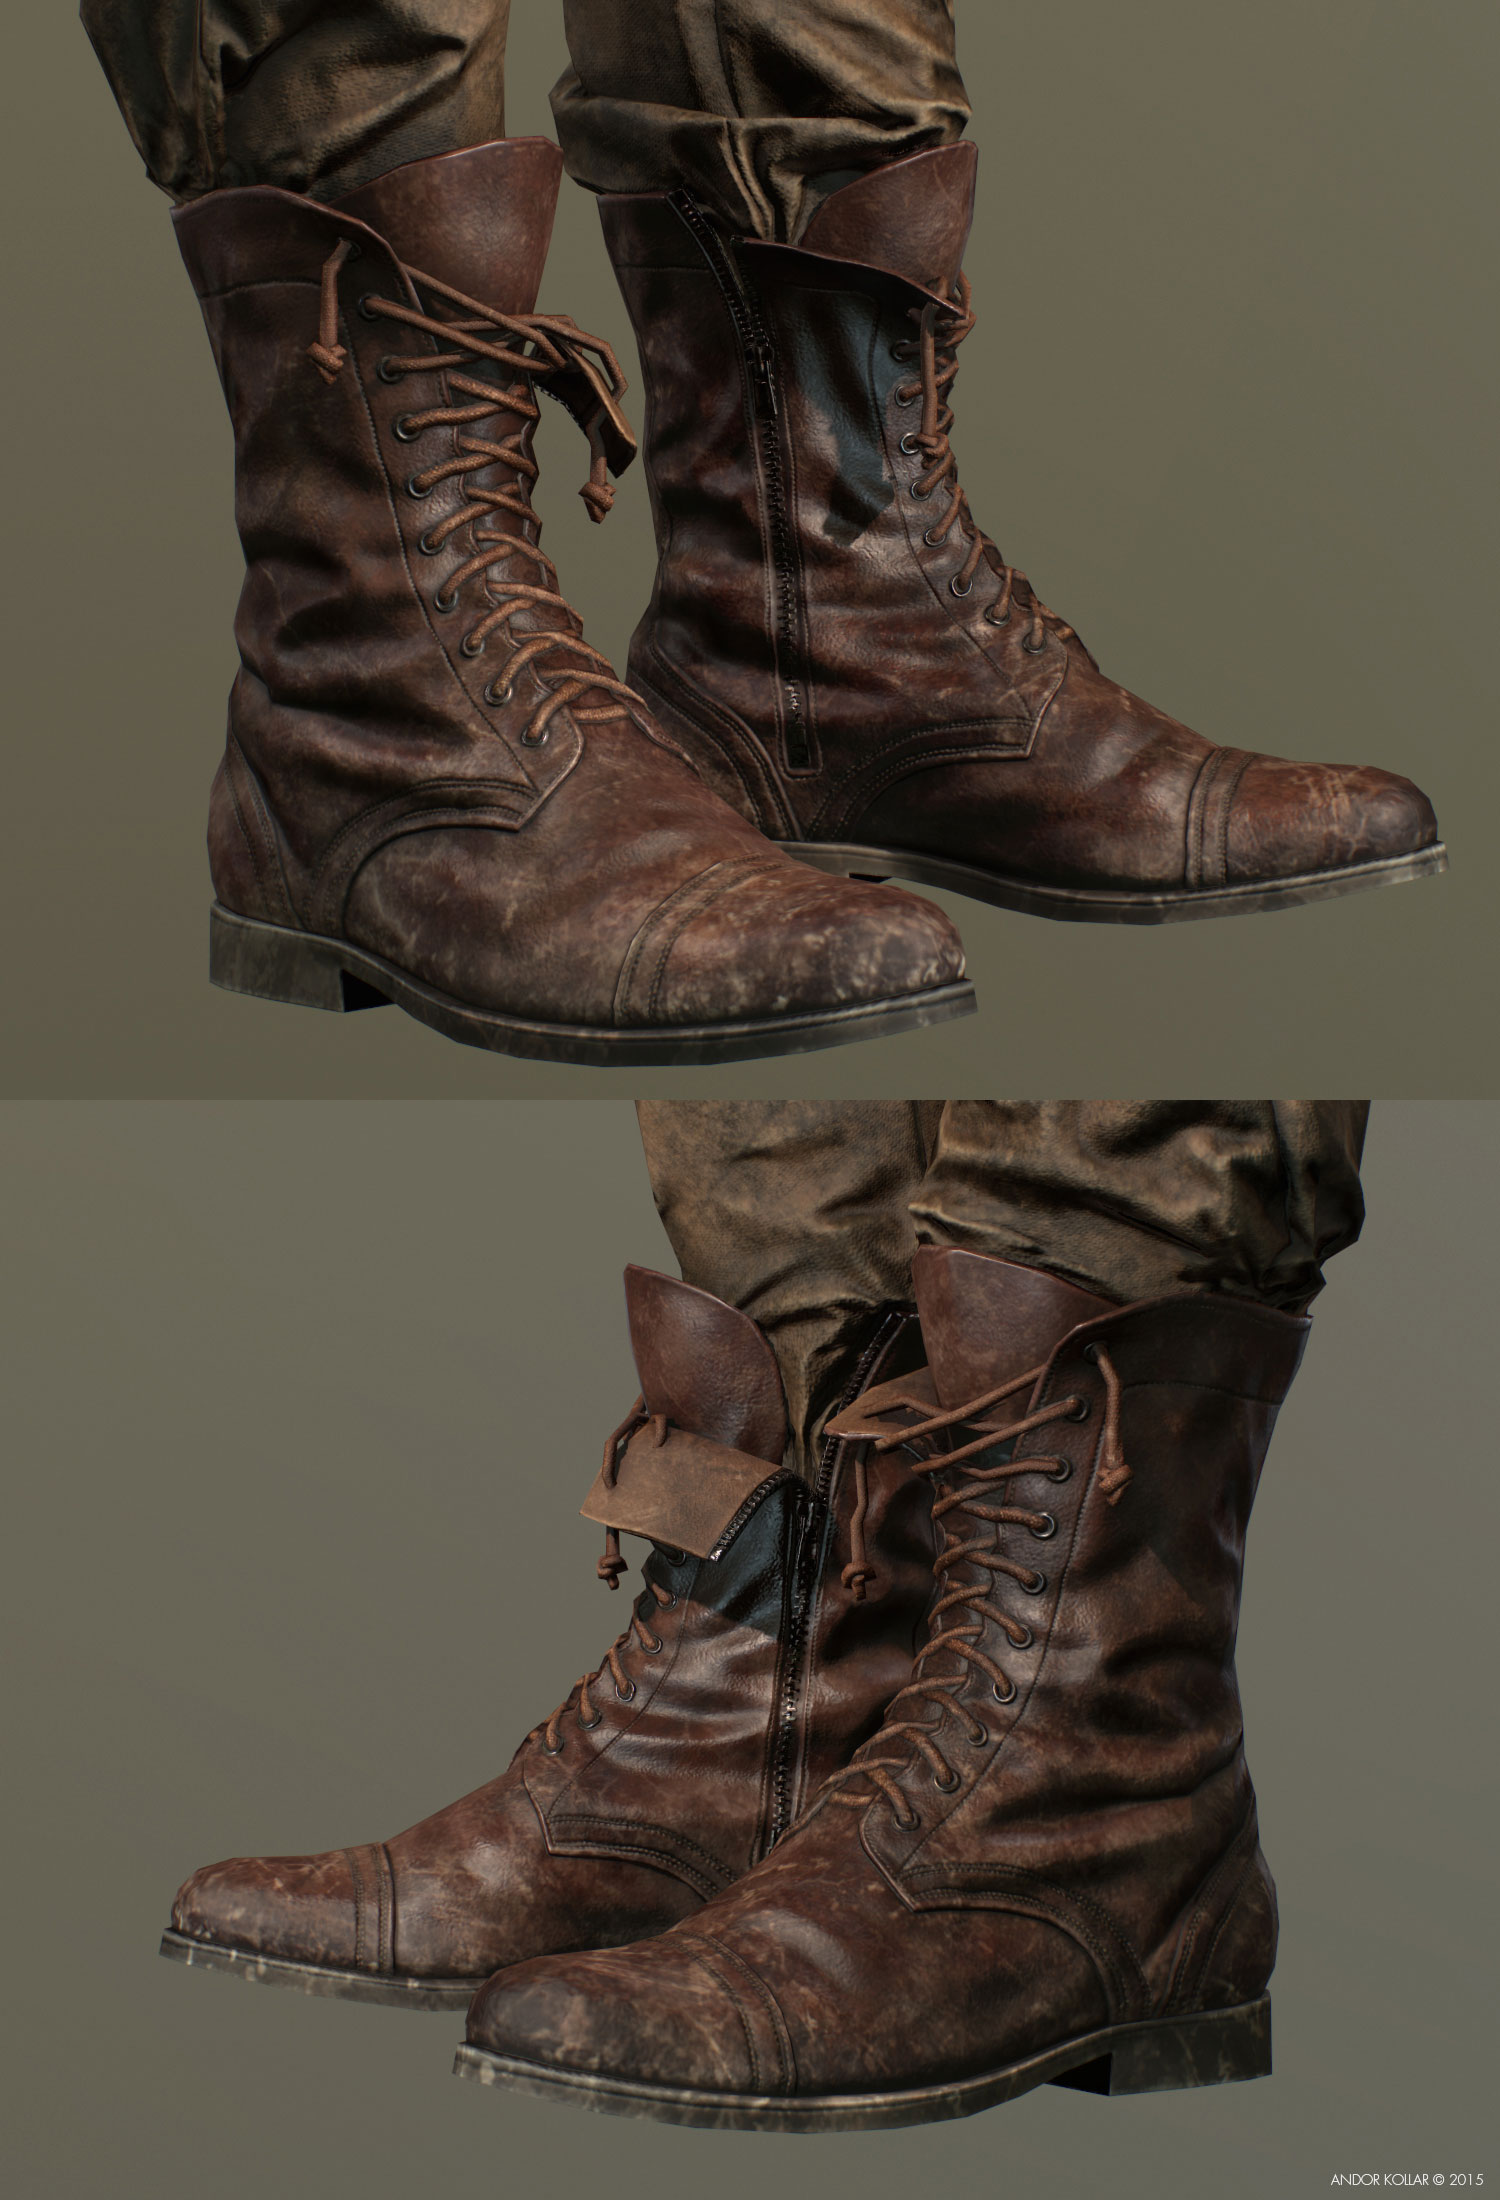 soldier boot